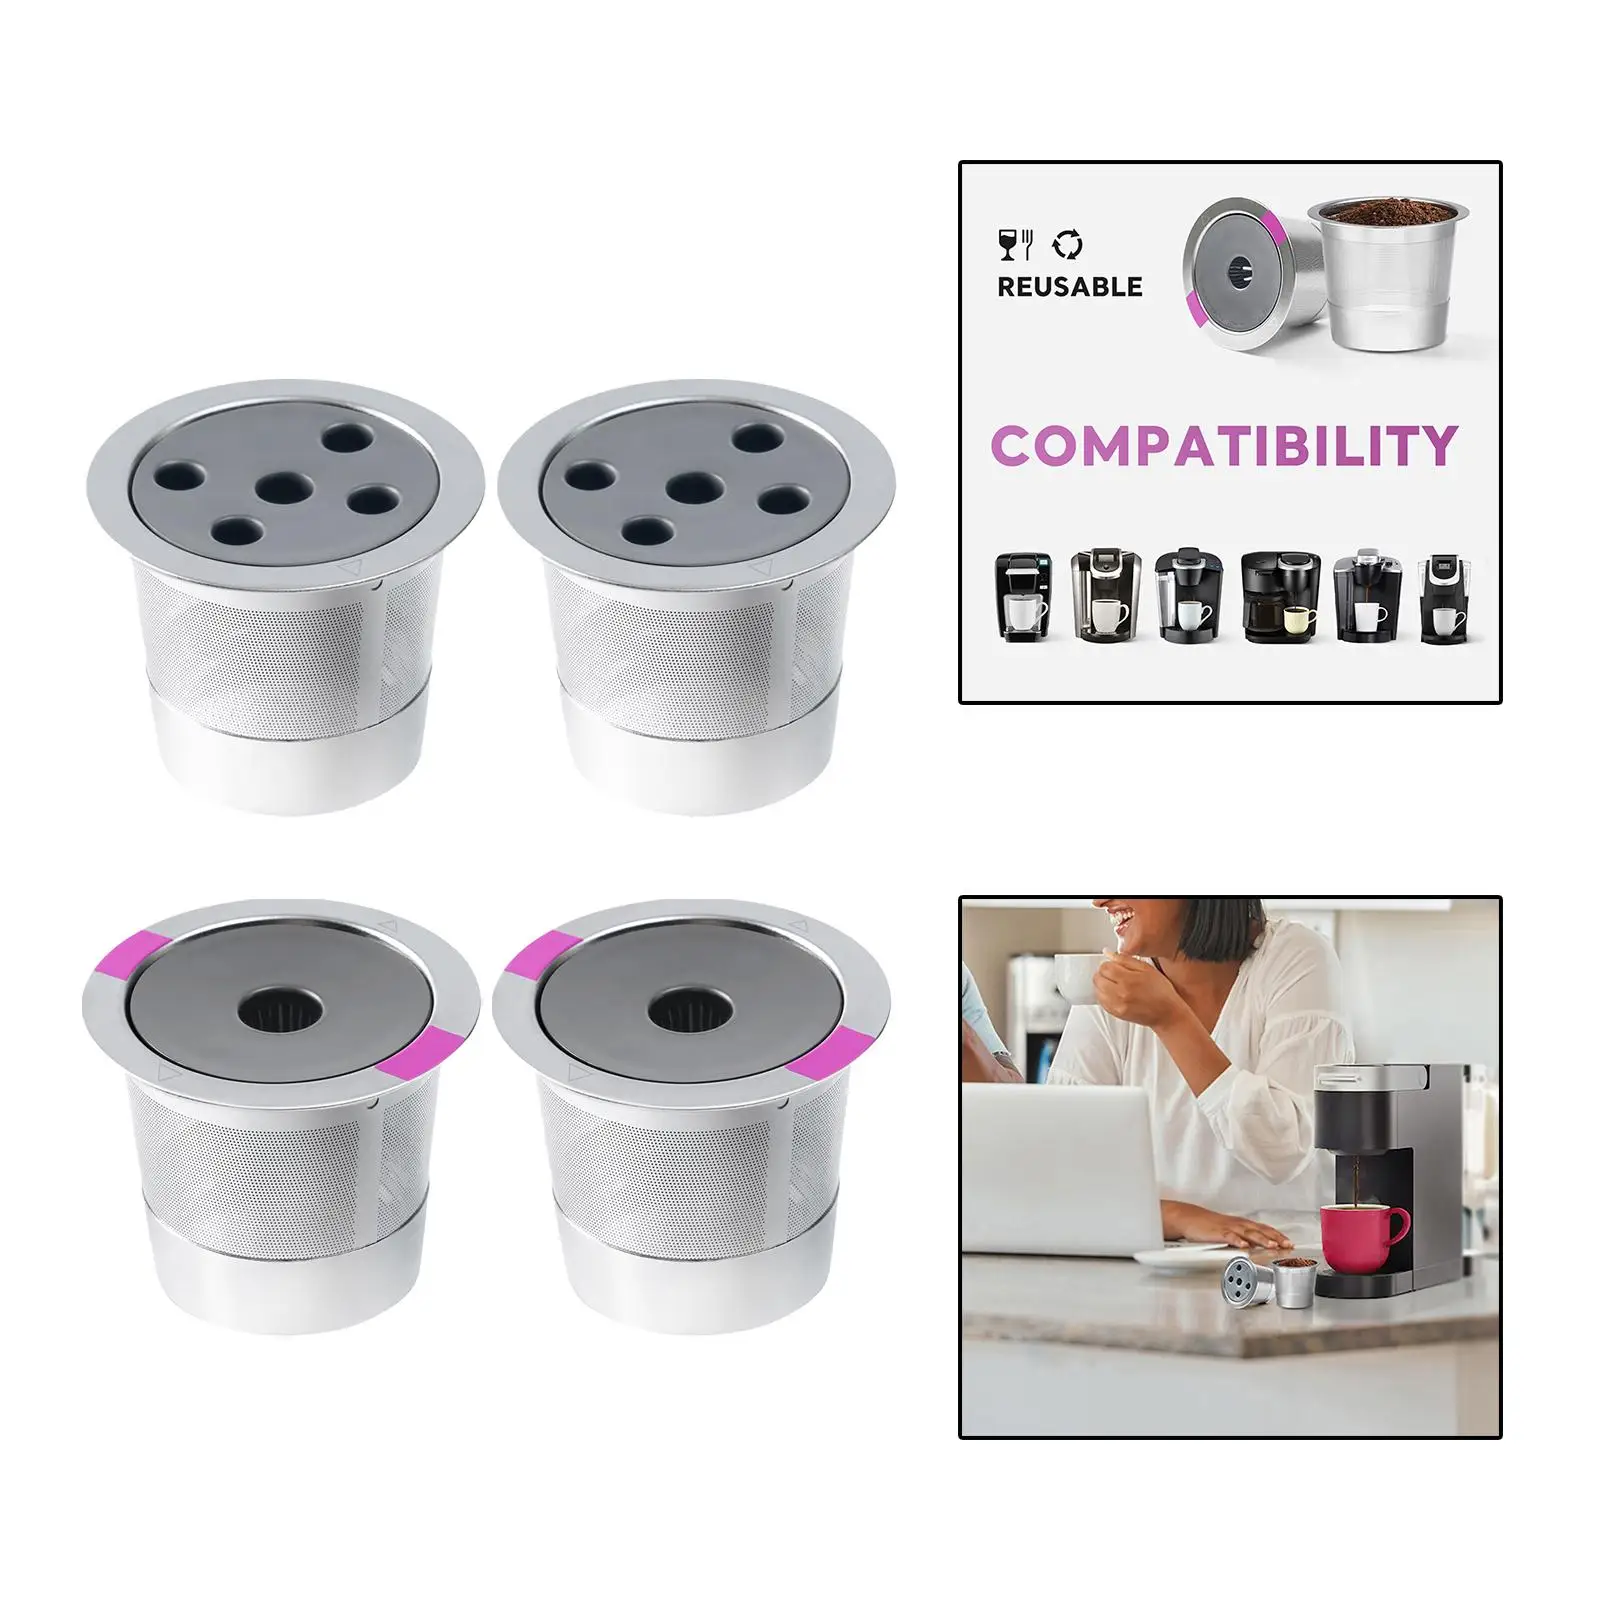 2x Reusable Coffee Filter Replacement Refillable Stainless Steel Single Serve Leakproof with Lid for Coffee Makers